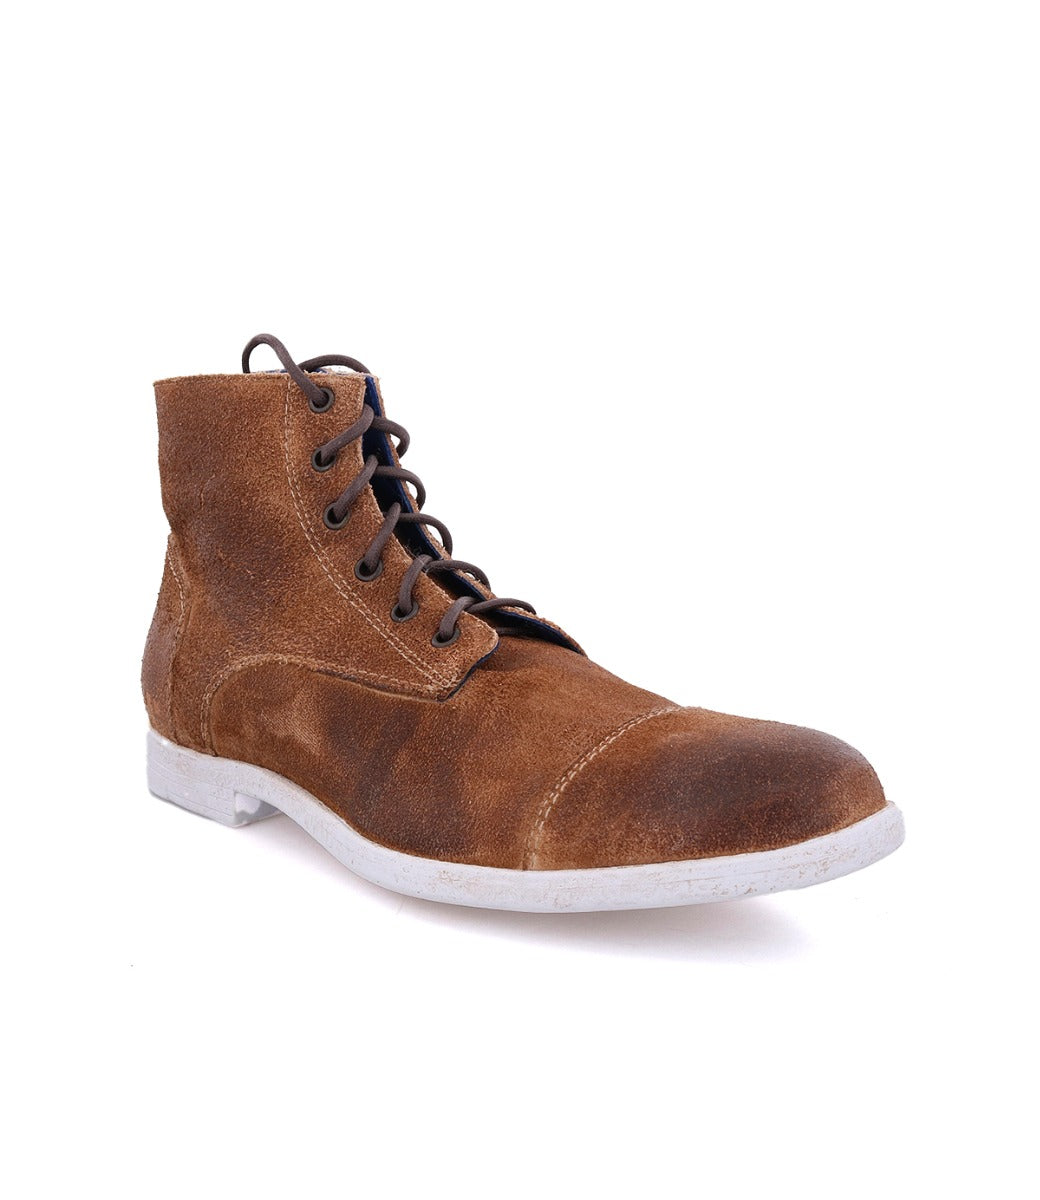 A men's Leonardo boot from Bed Stu with laces and a white sole.